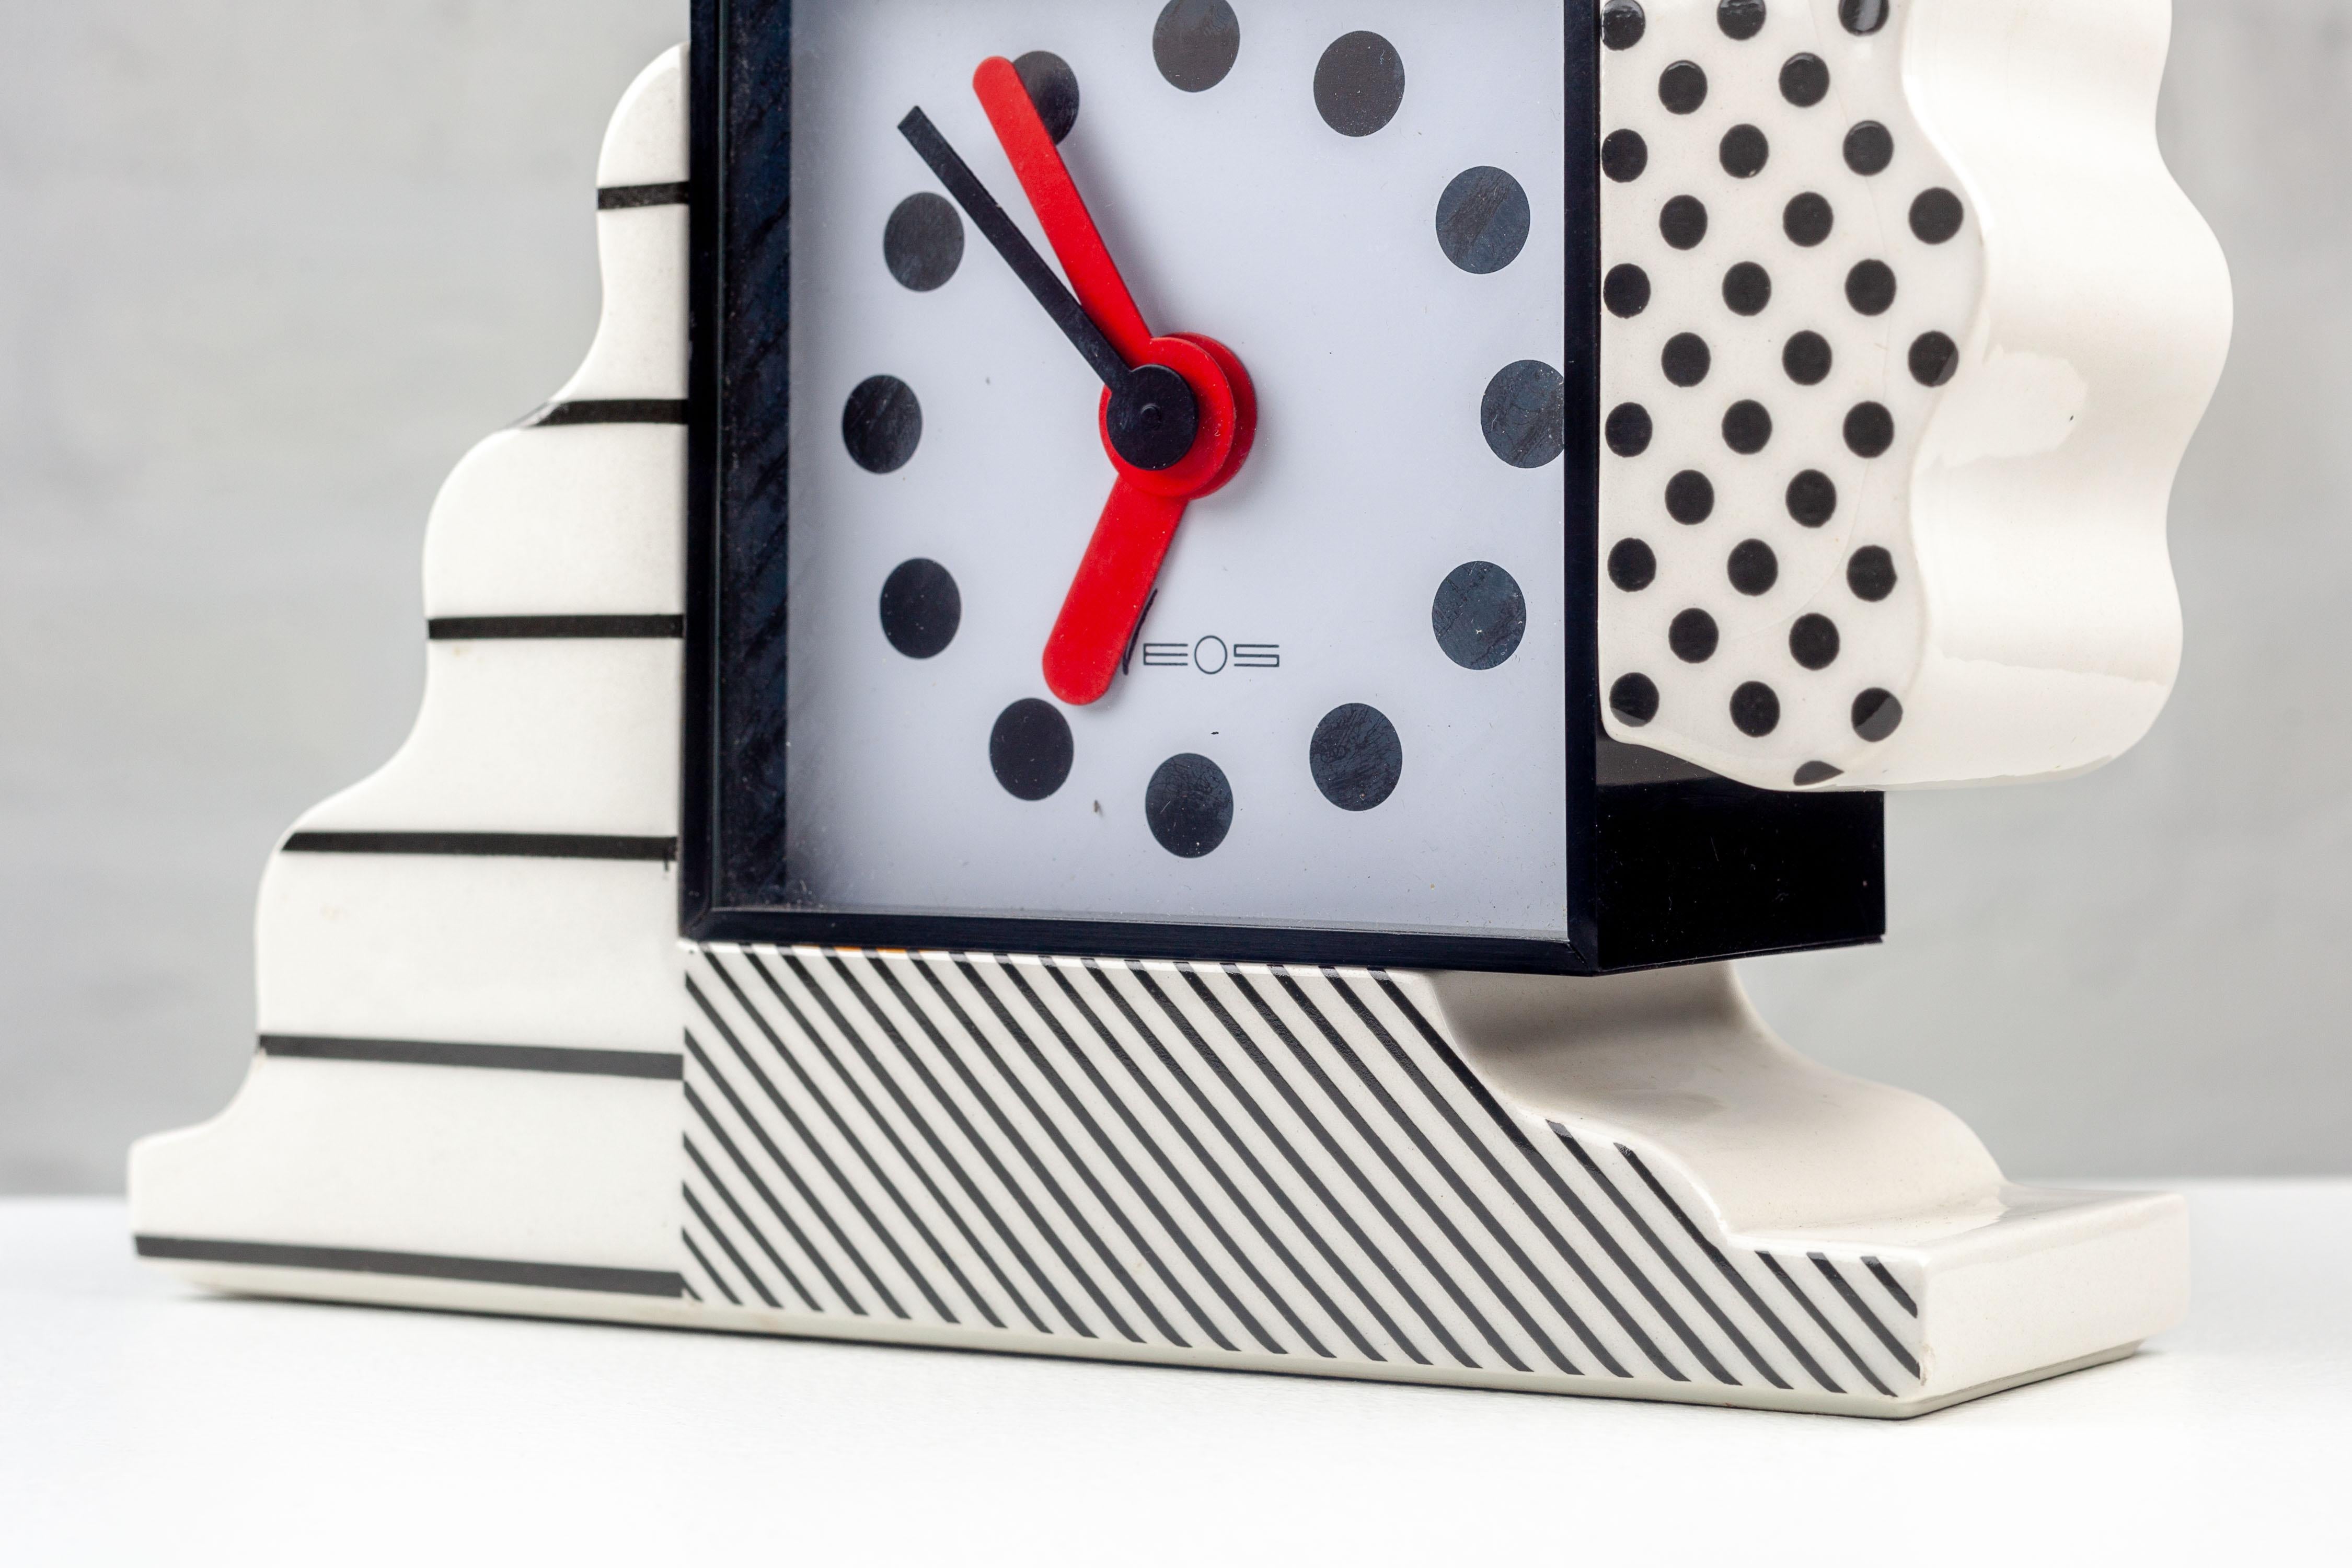 Porcelain Memphis Clock by Nathalie du Pasquier and George Sowden for Neos Lorenz Italy